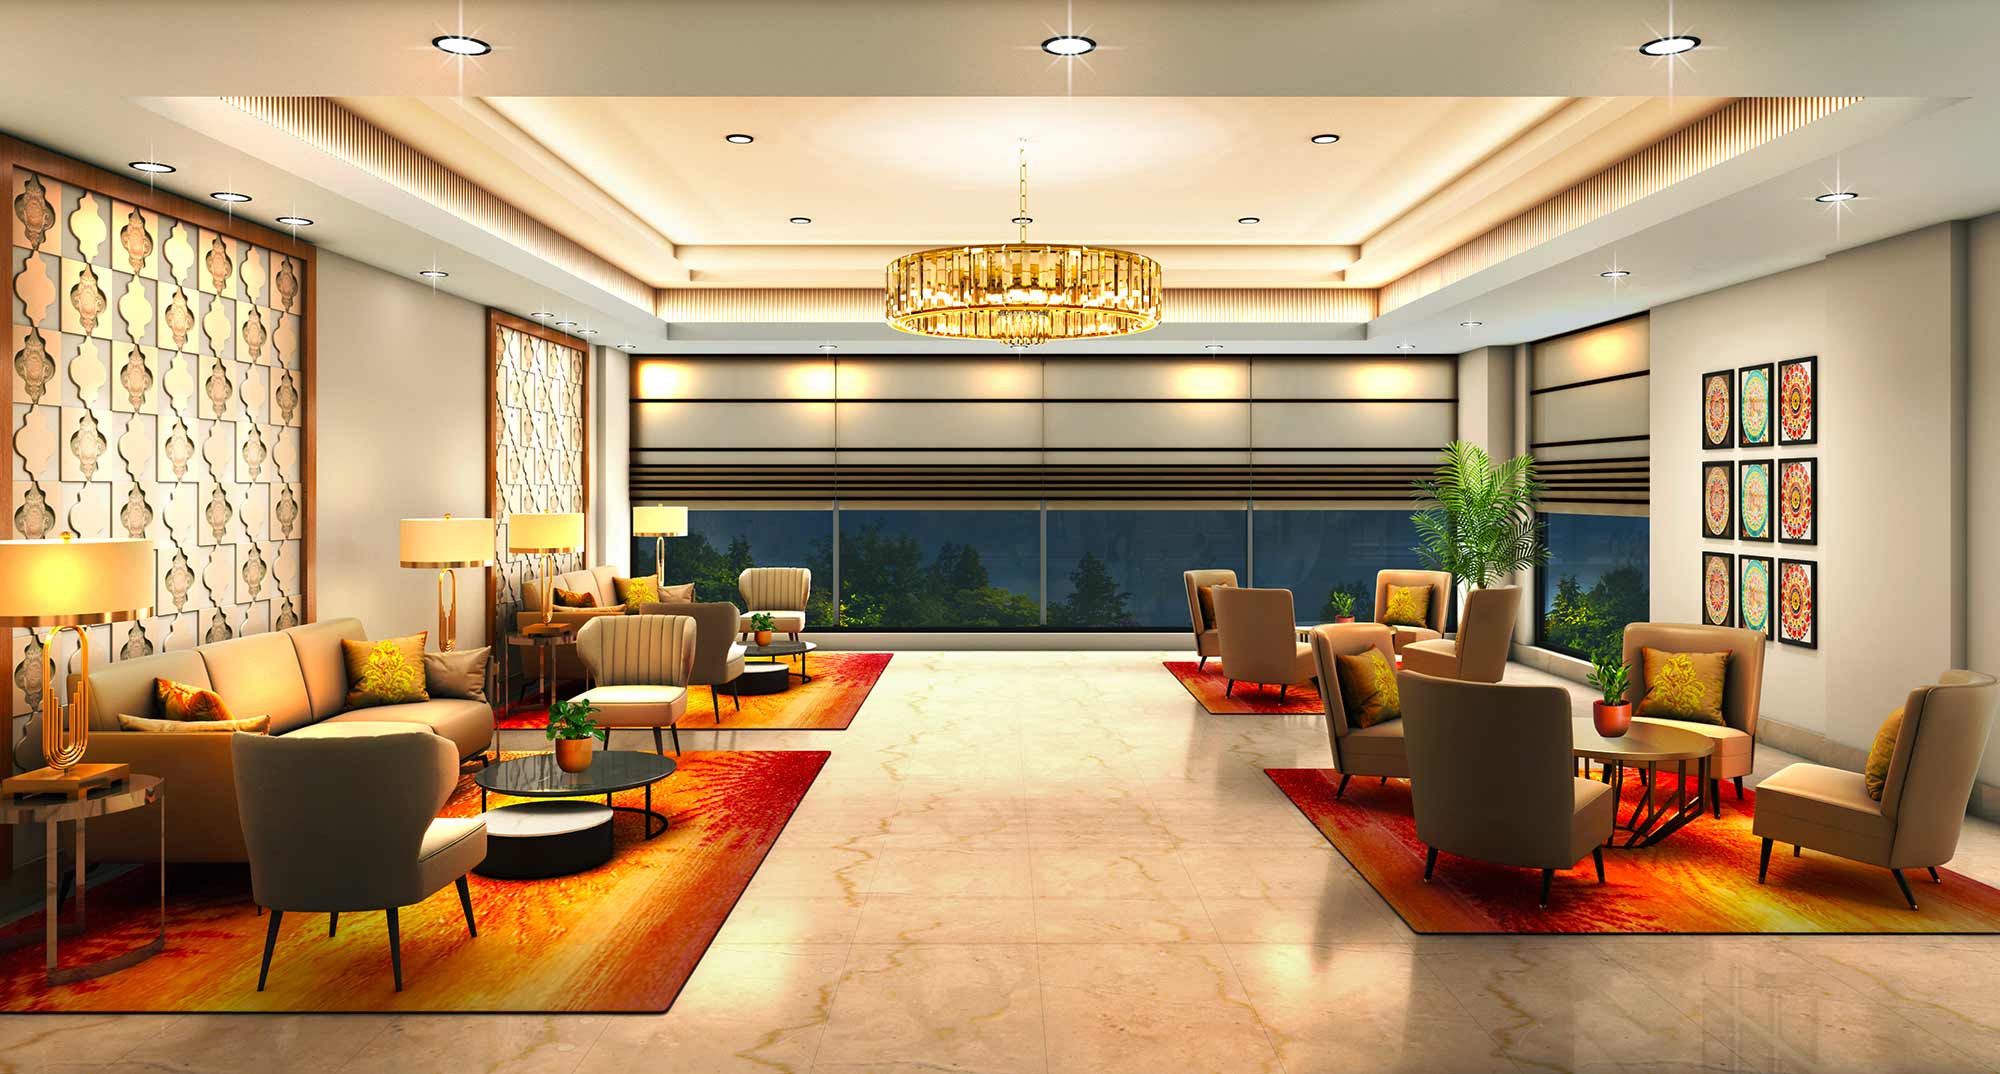 Sophisticated hotel lobby interior at night designed by Designers Gang featuring a crystal chandelier, plush seating areas, a fireplace, and floor-to-ceiling windows overlooking a city skyline. Warm lighting creates an inviting atmosphere.